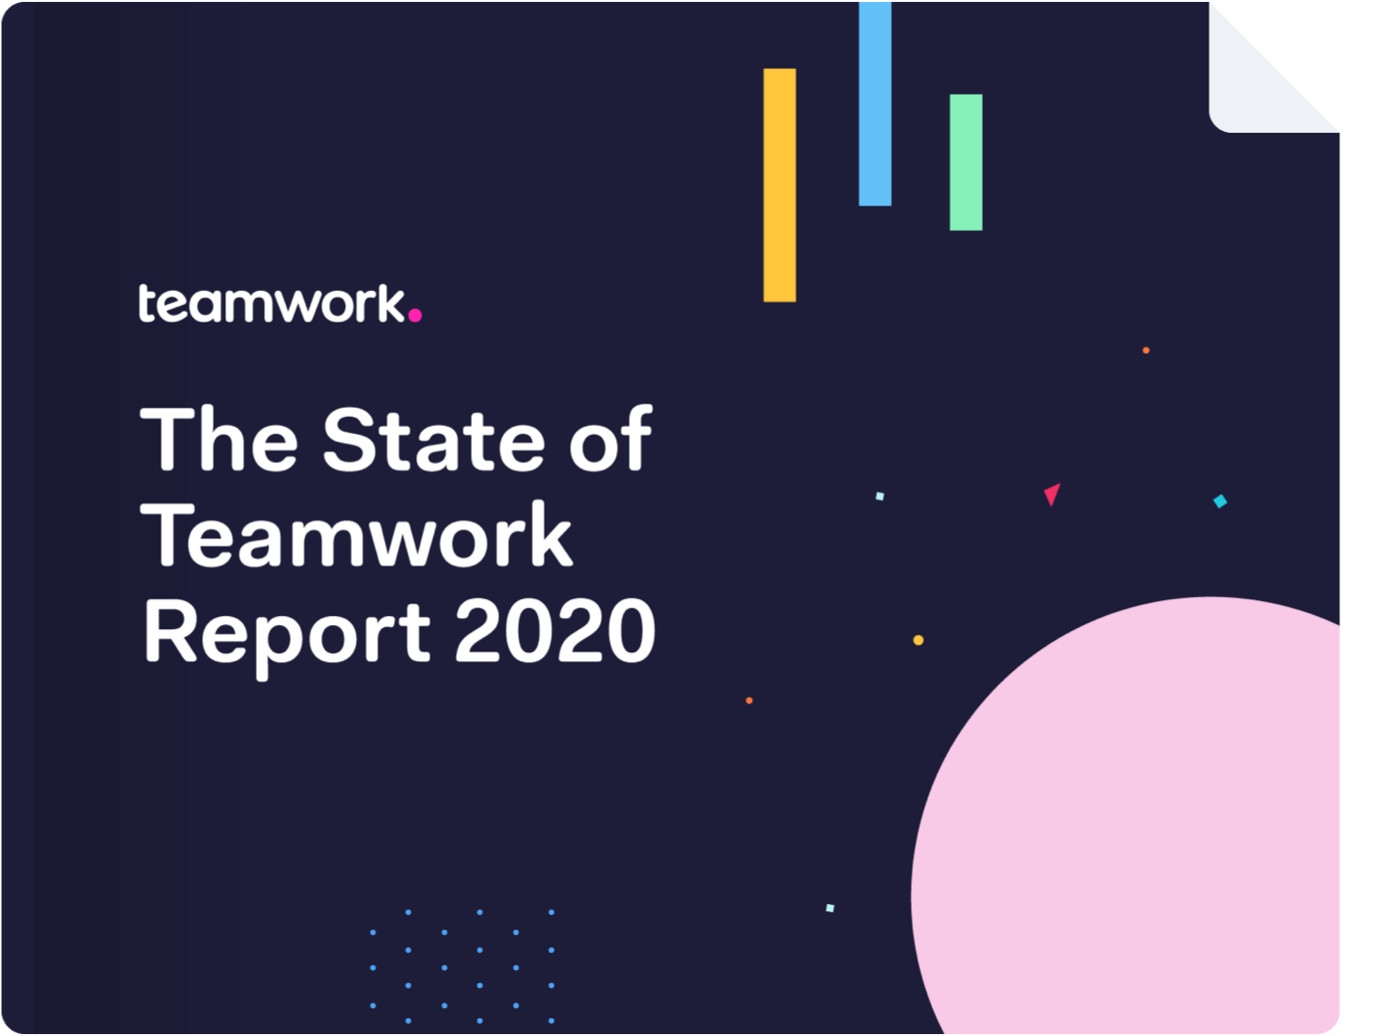 What does teamwork look like in 2020?